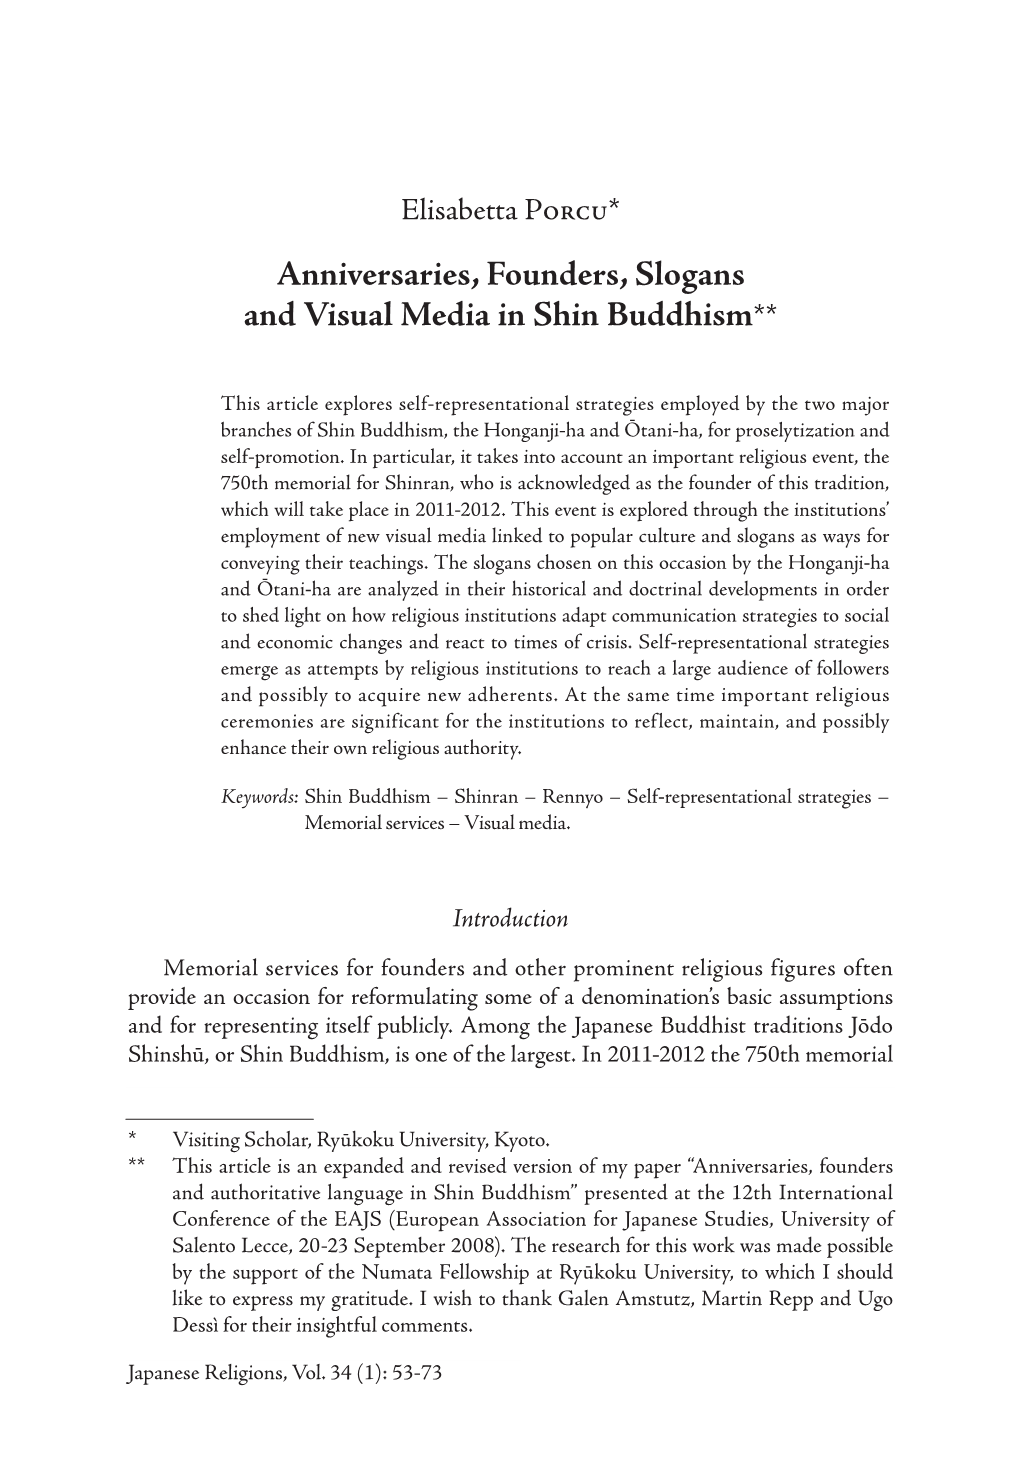 Anniversaries, Founders, Slogans and Visual Media in Shin Buddhism**